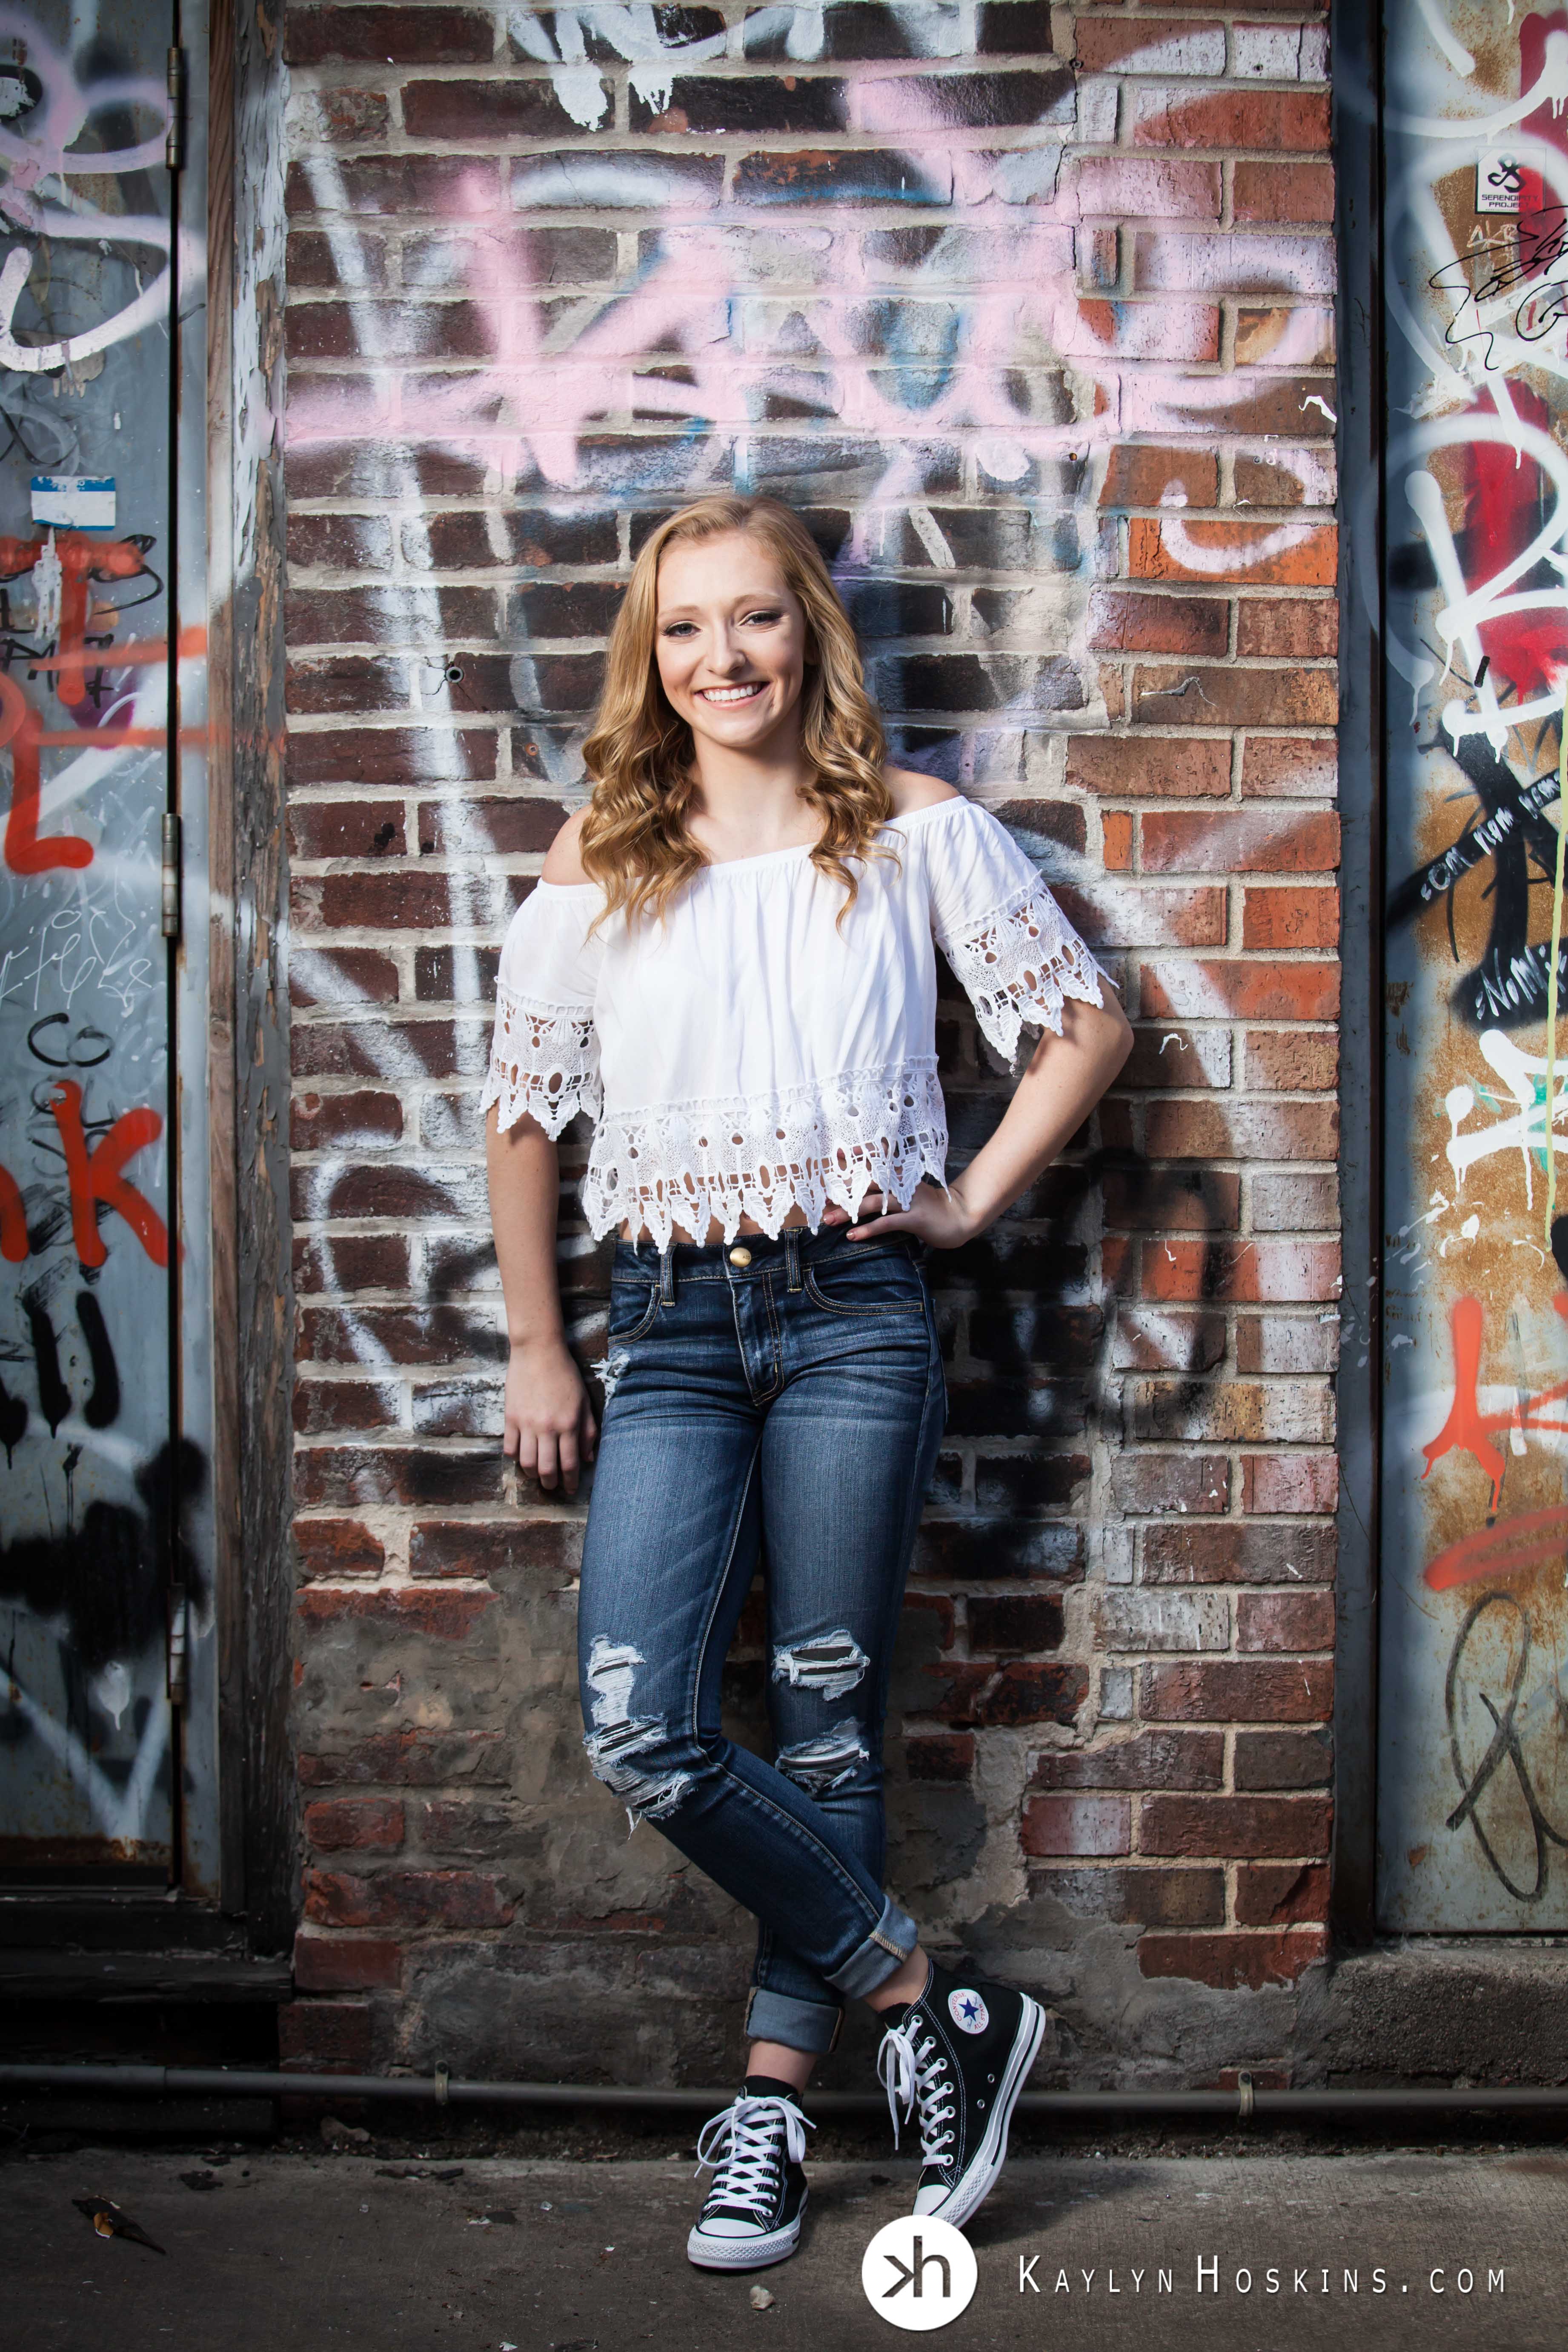 Solon Senior standing in front of Graffiti wall in Alley downtown Iowa City